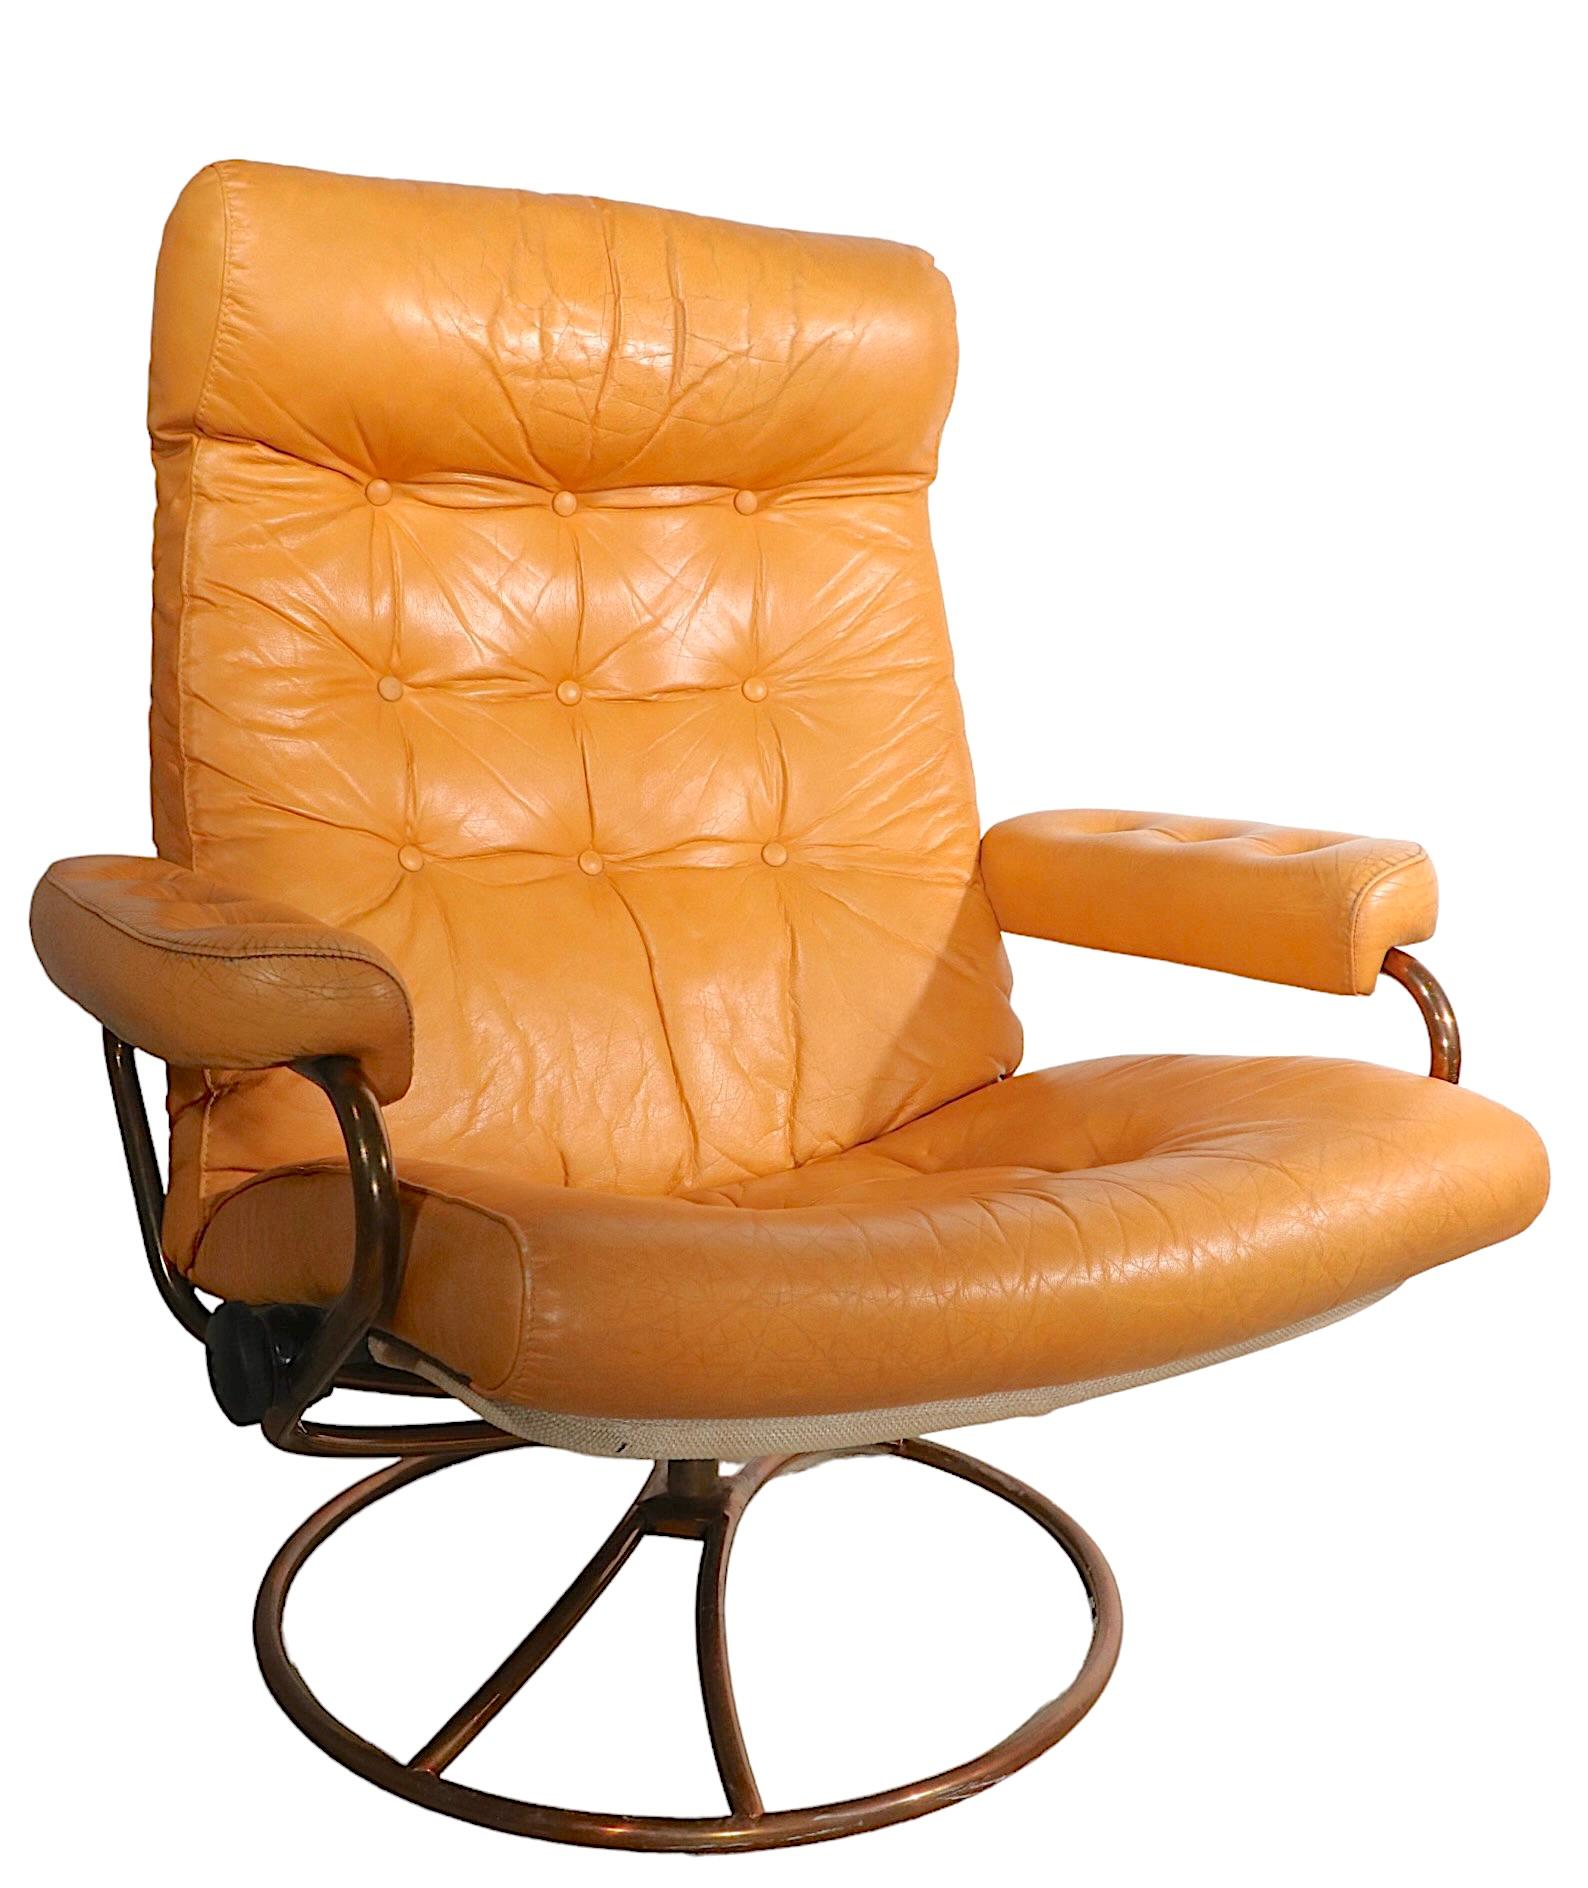 Vintage Ekornes Stressless Leather Swivel Reclining Lounge Chair and Ottoman 8